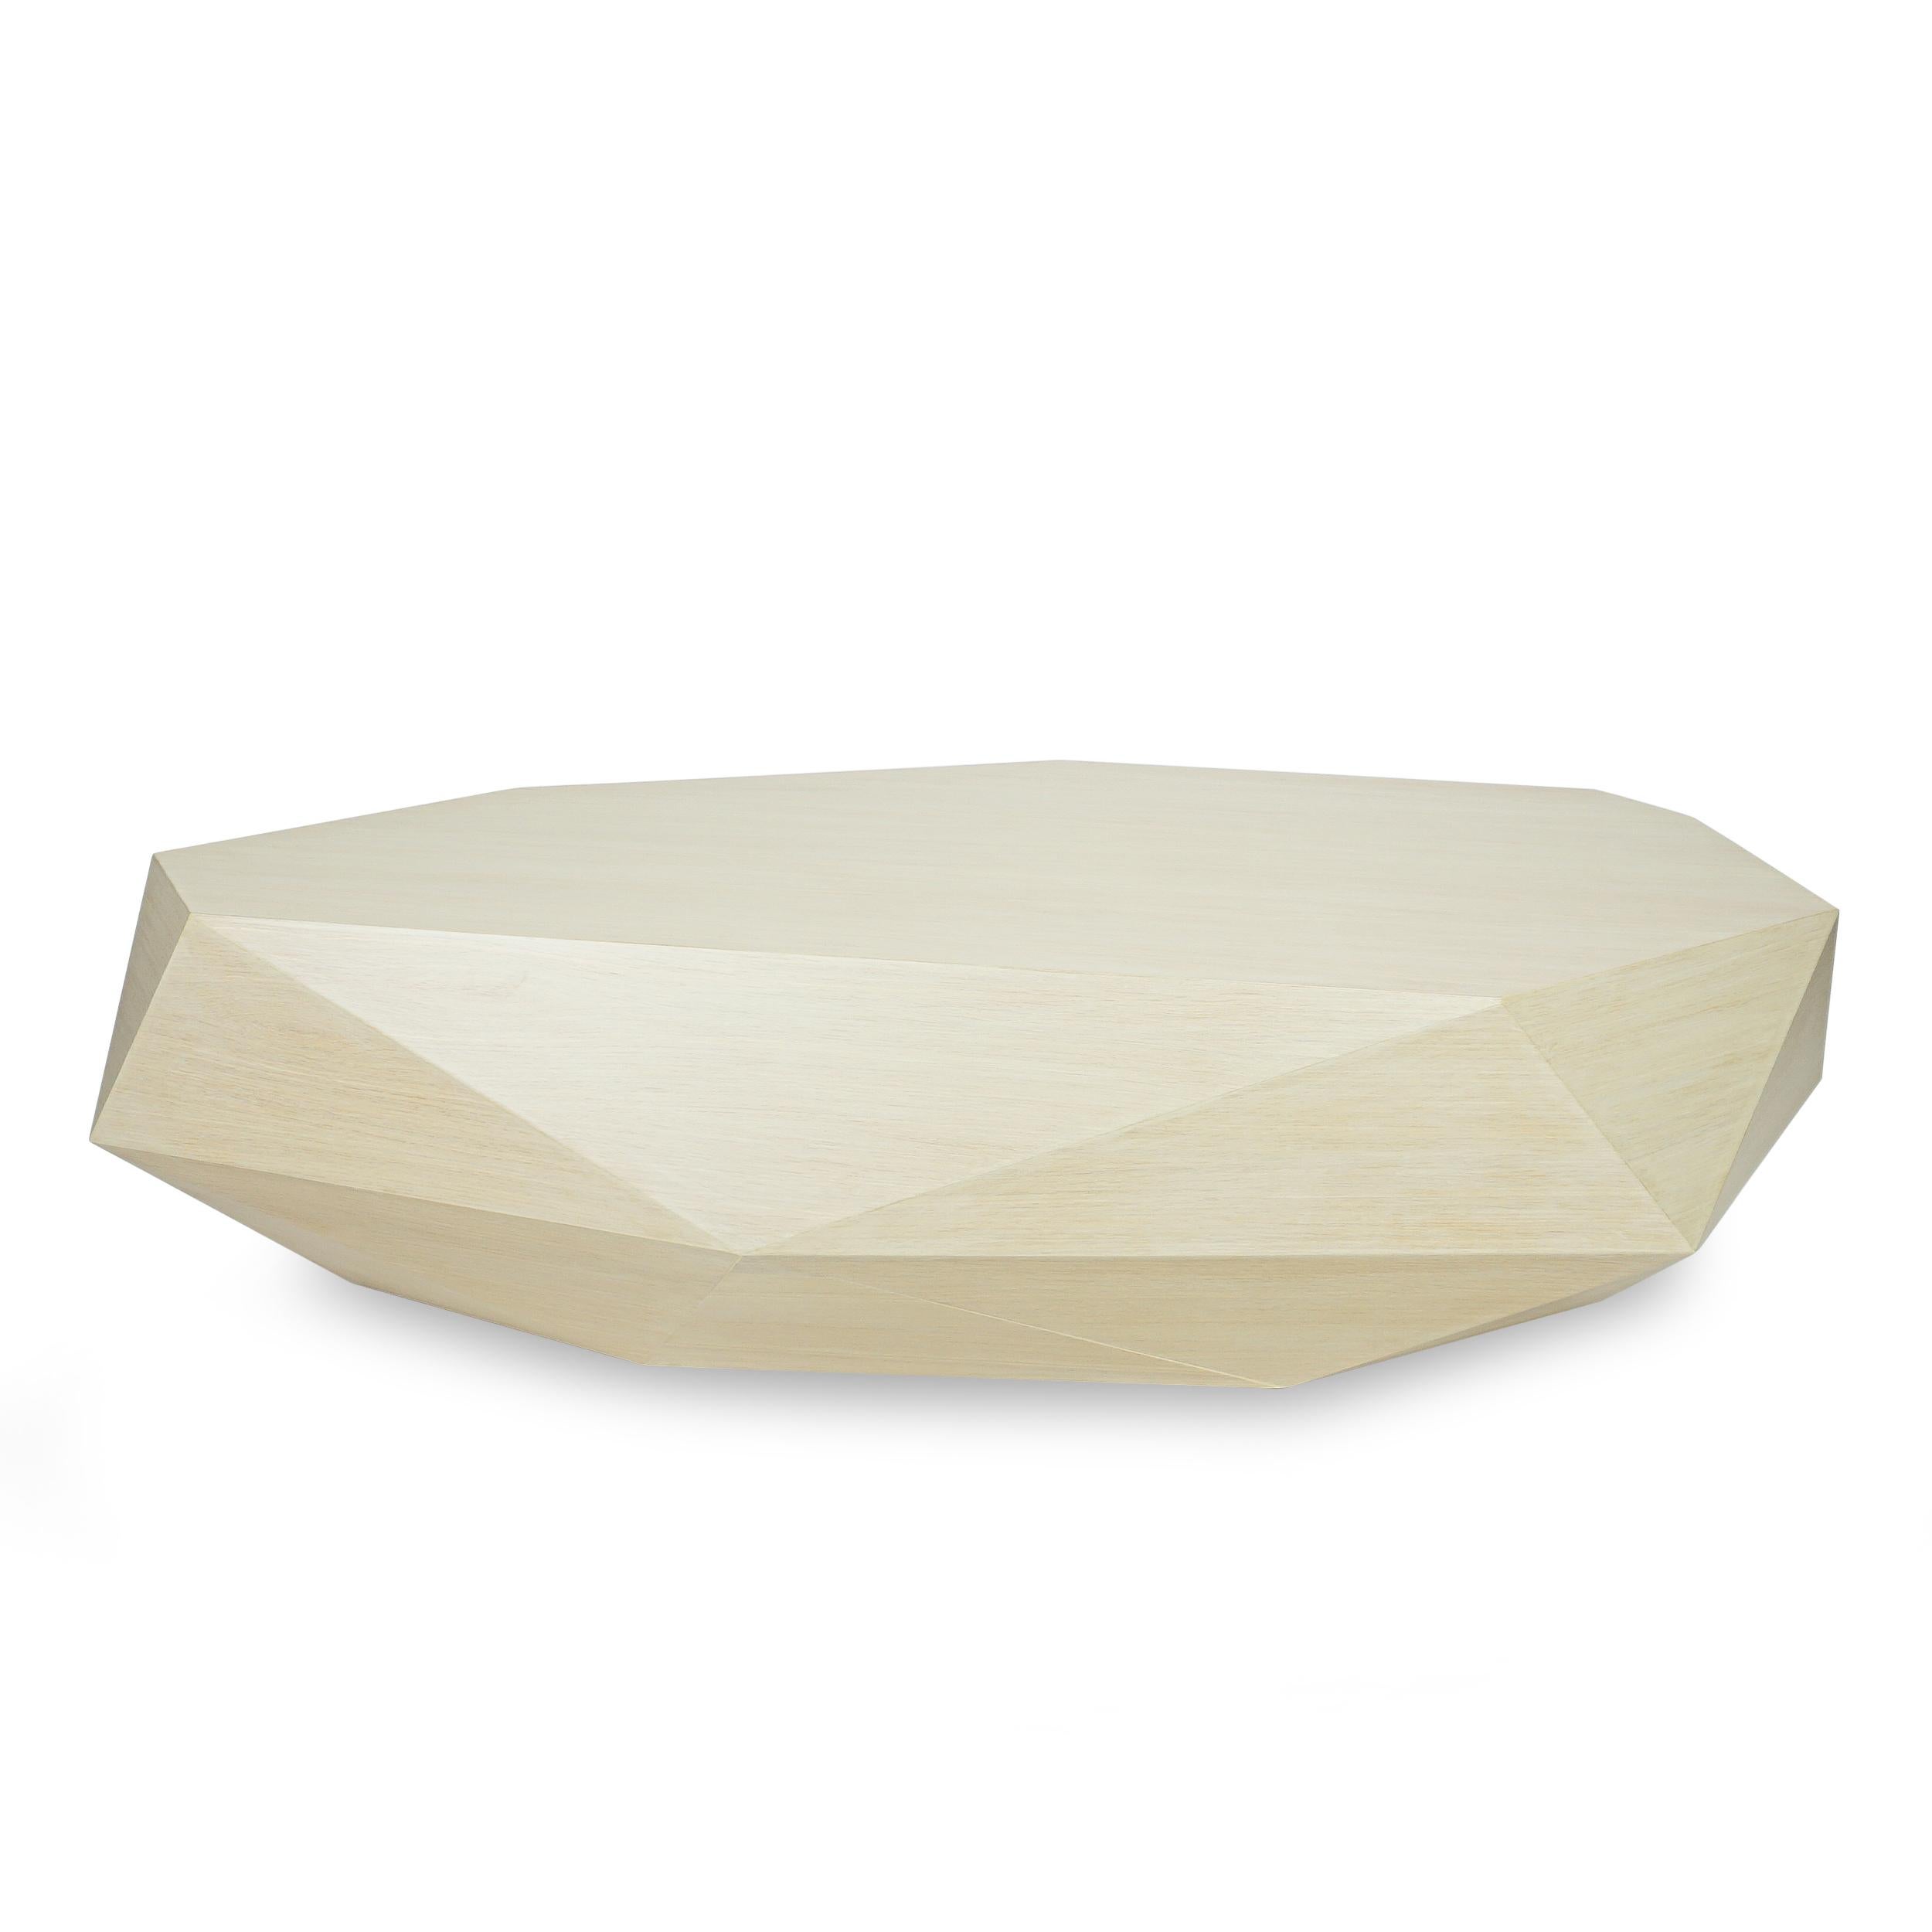 Faceted white oak veneer coffee table. Facets may not be identical from table to table. Handmade in Norwalk CT. Overall size and shape/orientation customizable.

Measurements:
Outside: 55”W x 24”D x 17”H

Price As Shown: $5,120 each
Customization